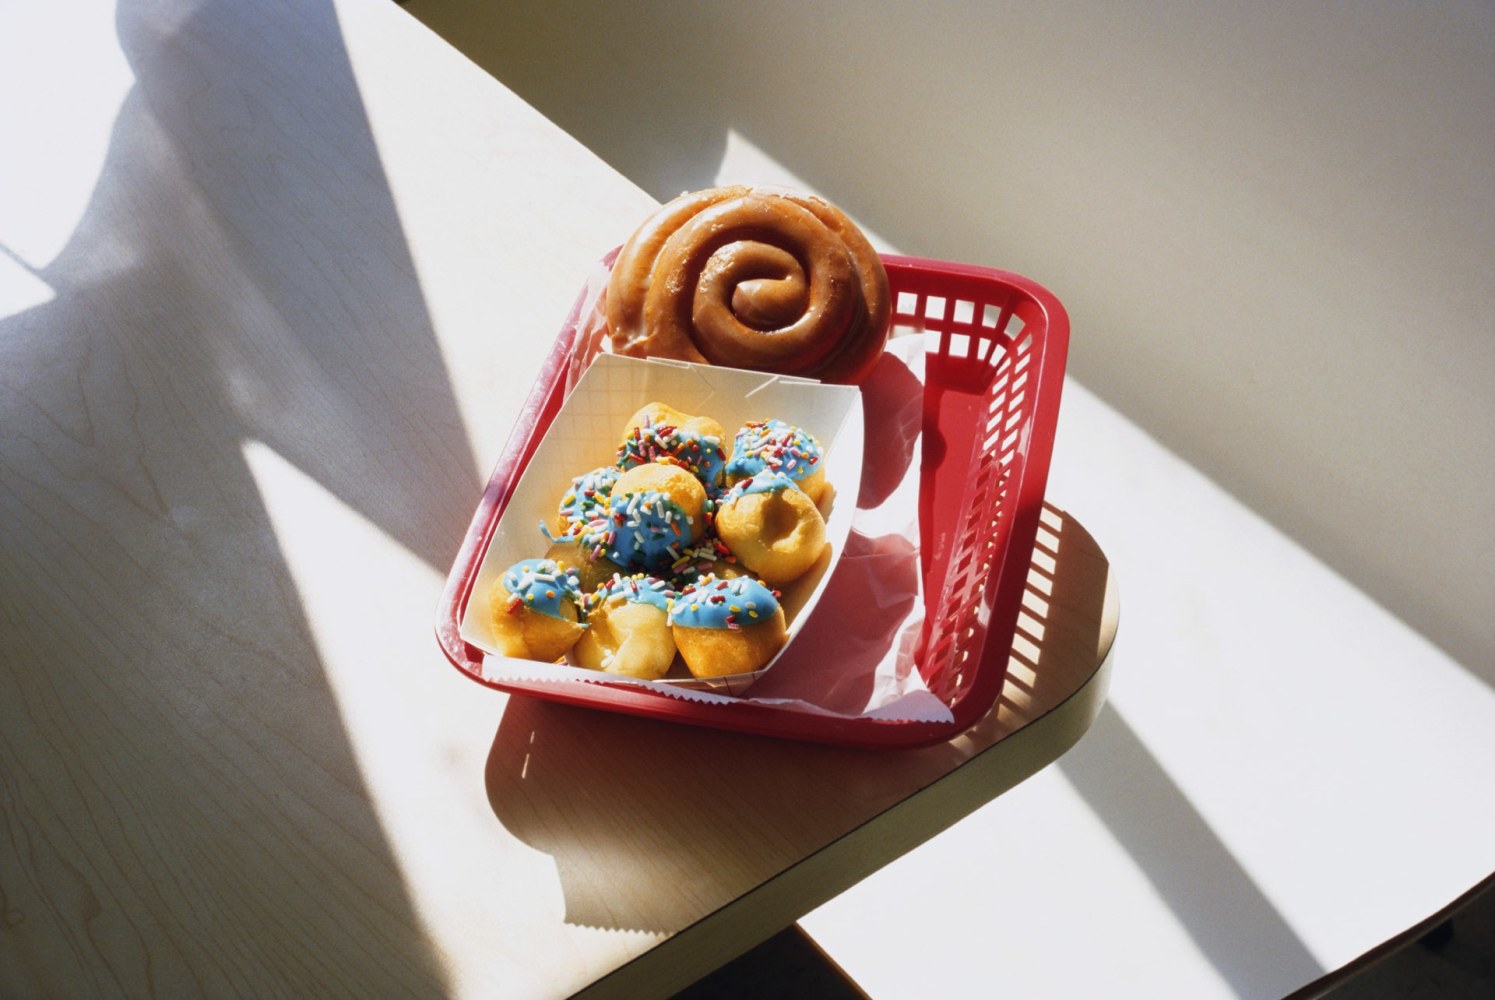 Mickey Aloisio

Untitled (Cinnamon Roll Basket), 2022

archival pigment print, ed. of 3

image: 24 &amp;times; 36 in. / 61 &amp;times; 91.4 cm

framed: 25 &amp;times; 37 in. / 63.5 &amp;times; 94 cm&amp;nbsp;